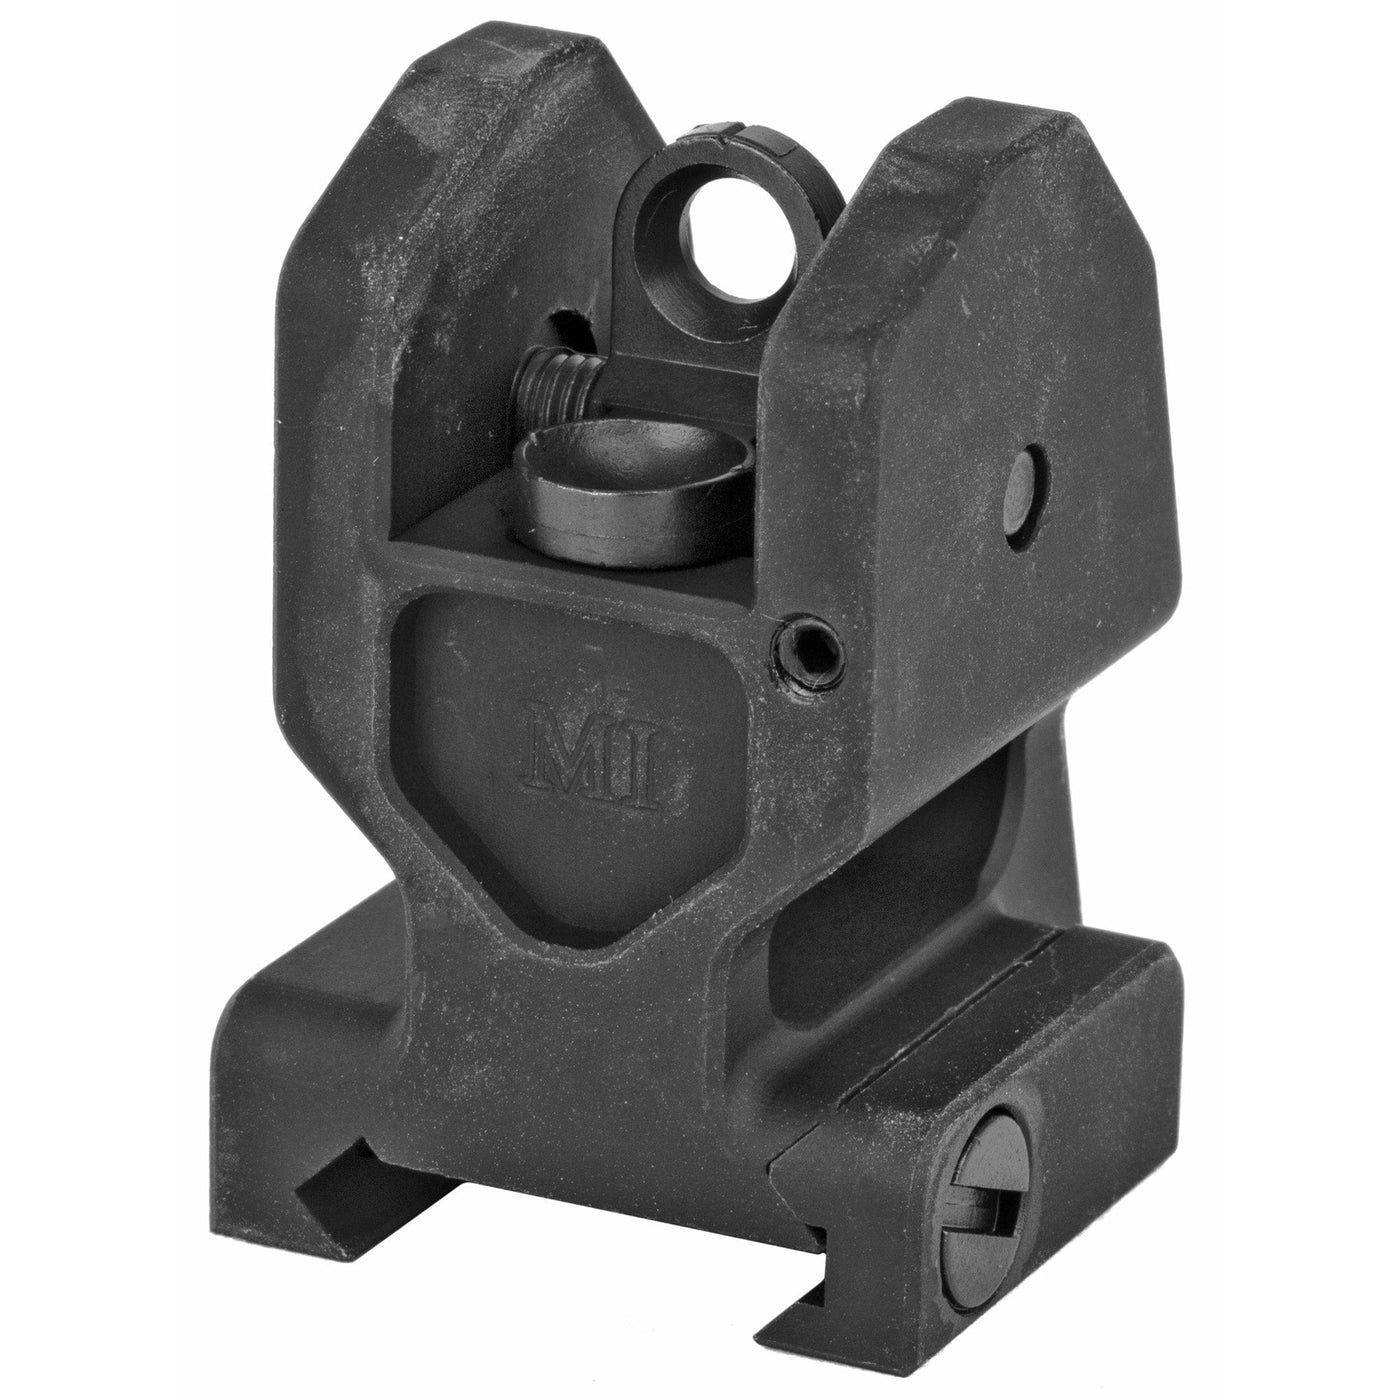 Midwest Industries Midwest Combat Back Up Rear Sight Sights/Lasers/Lights